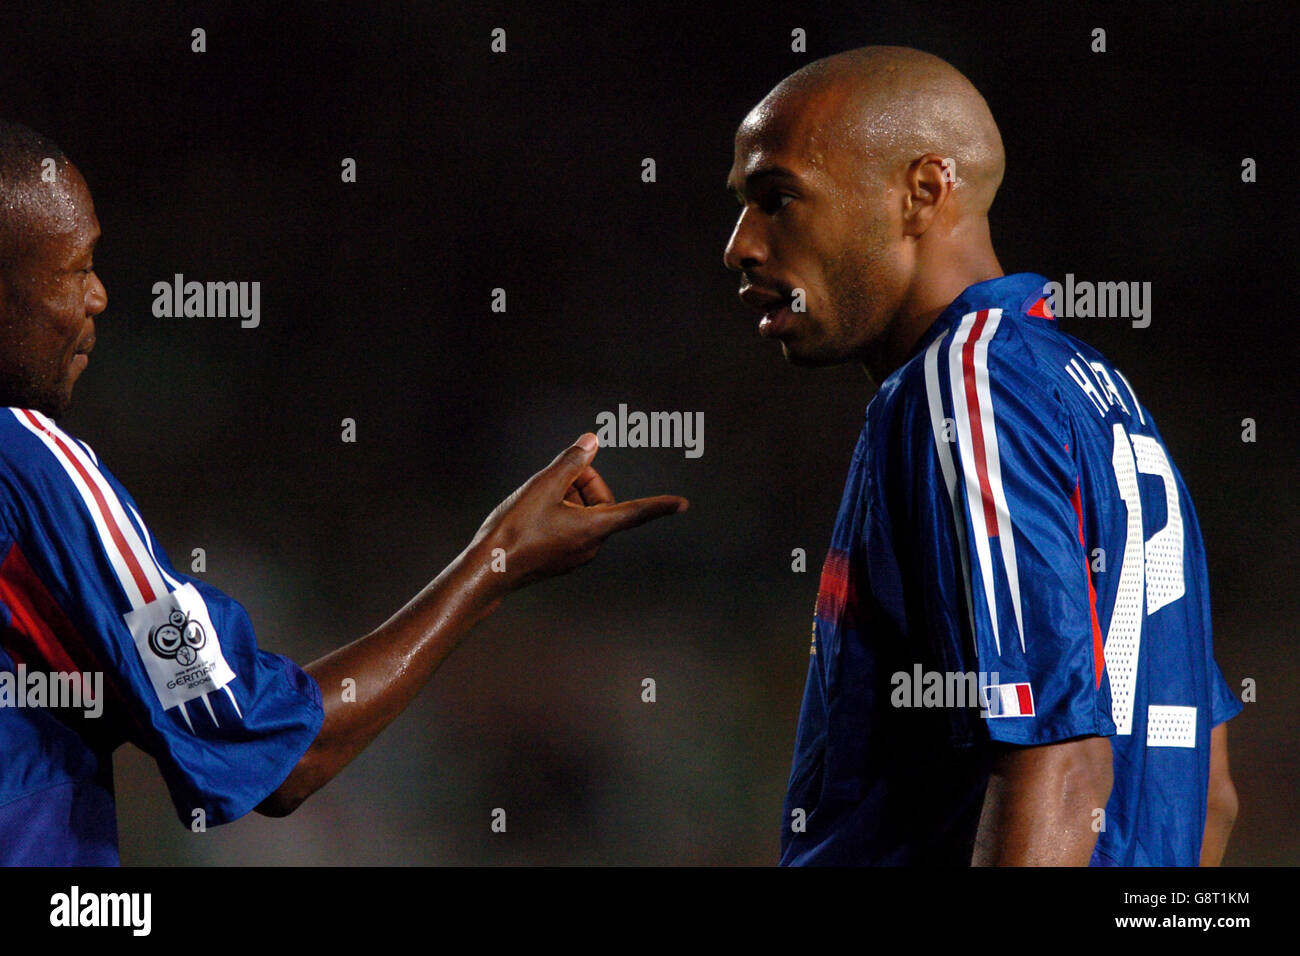 Soccer - FIFA World Cup 2006 Qualifier - Group Four - Ireland v France - Lansdowne Road. France's Thierry Henry (r) and Claude Makelele (l) Stock Photo